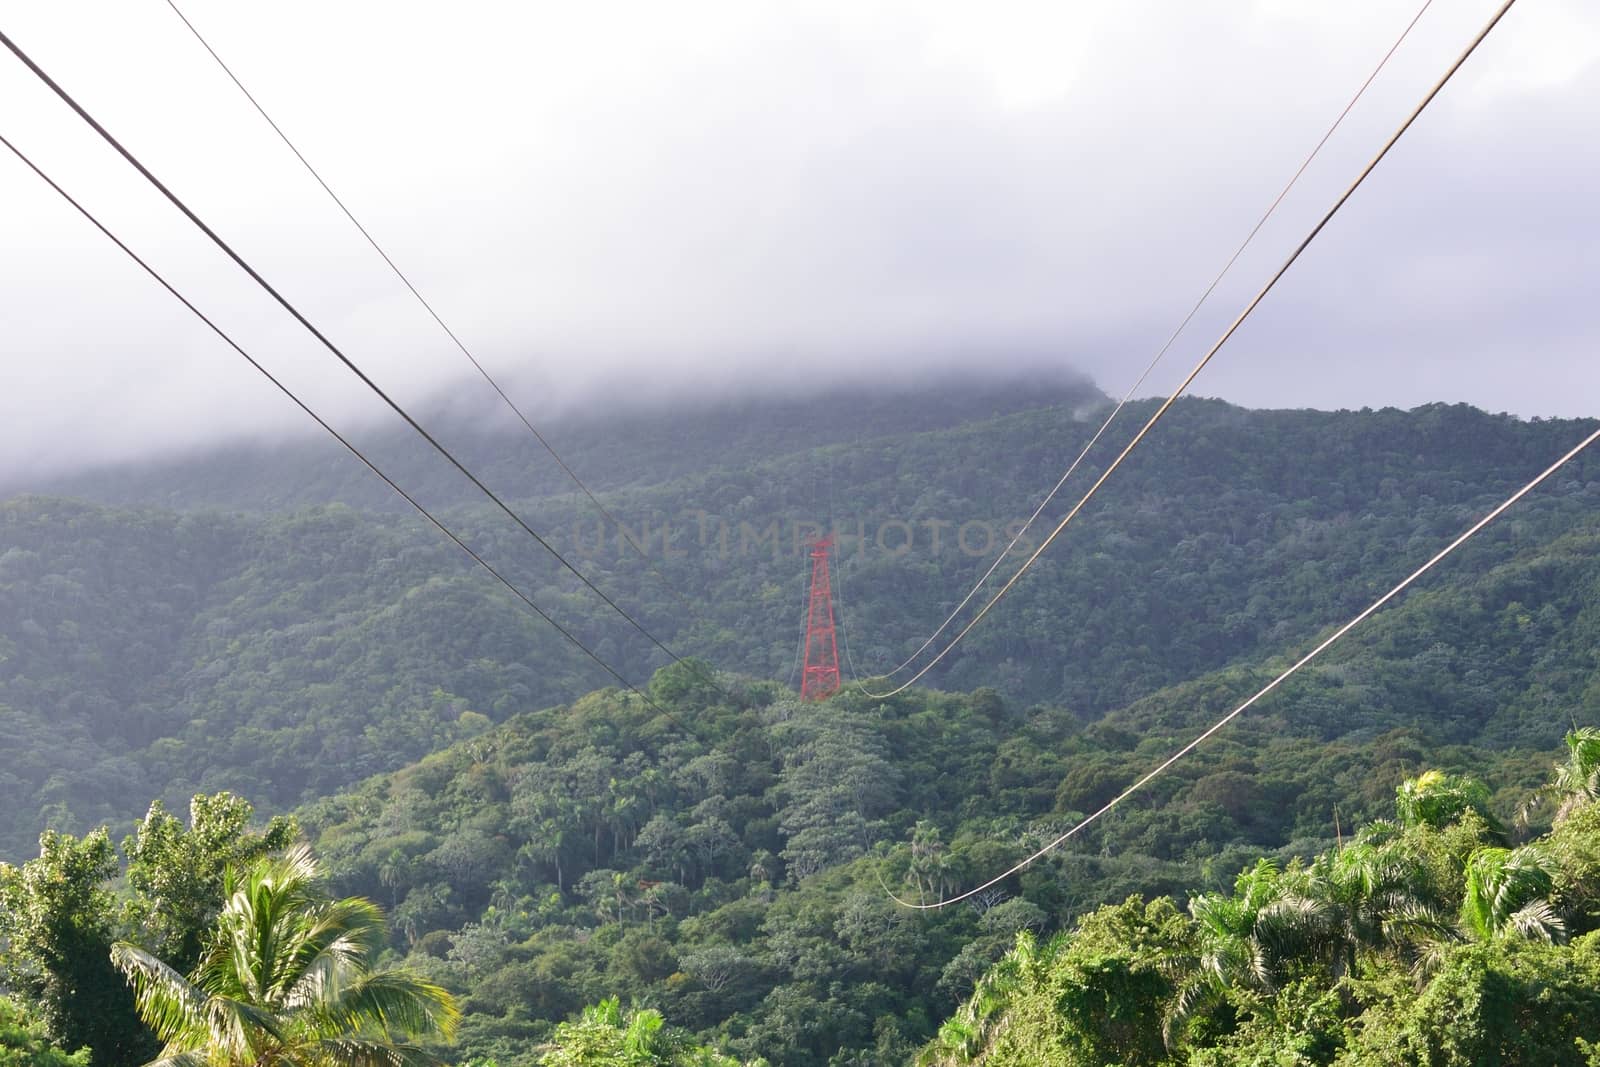 Cable car structure heading up to hills in jungle